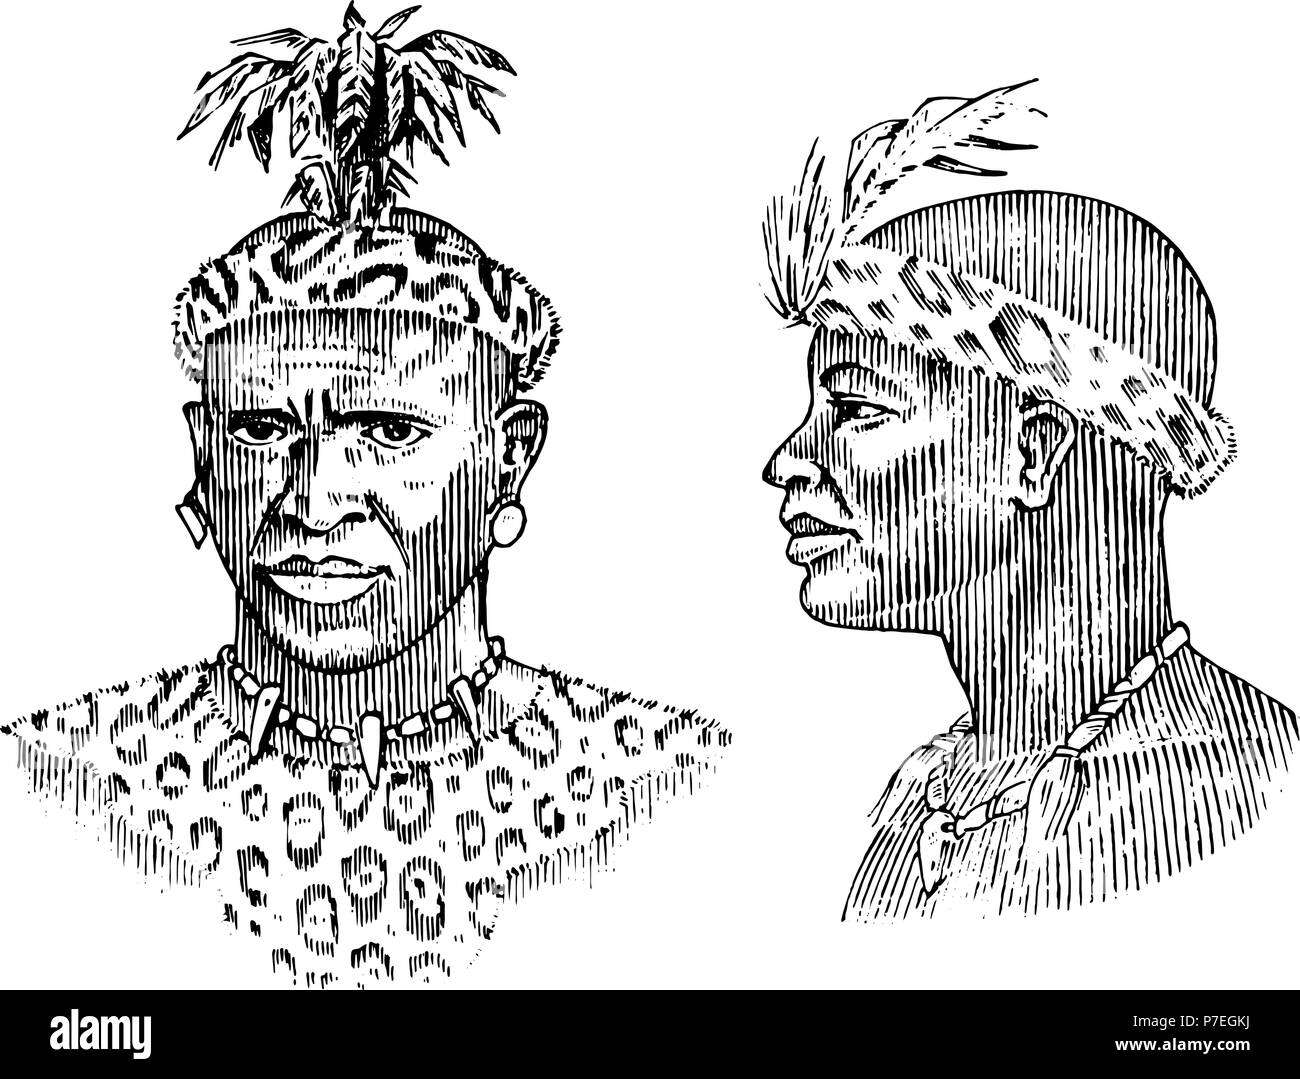 African tribes, portraits of Aborigines in traditional costumes. Australian Warlike black native man. Engraved hand drawn old monochrome Vintage sketch for label. Stock Vector